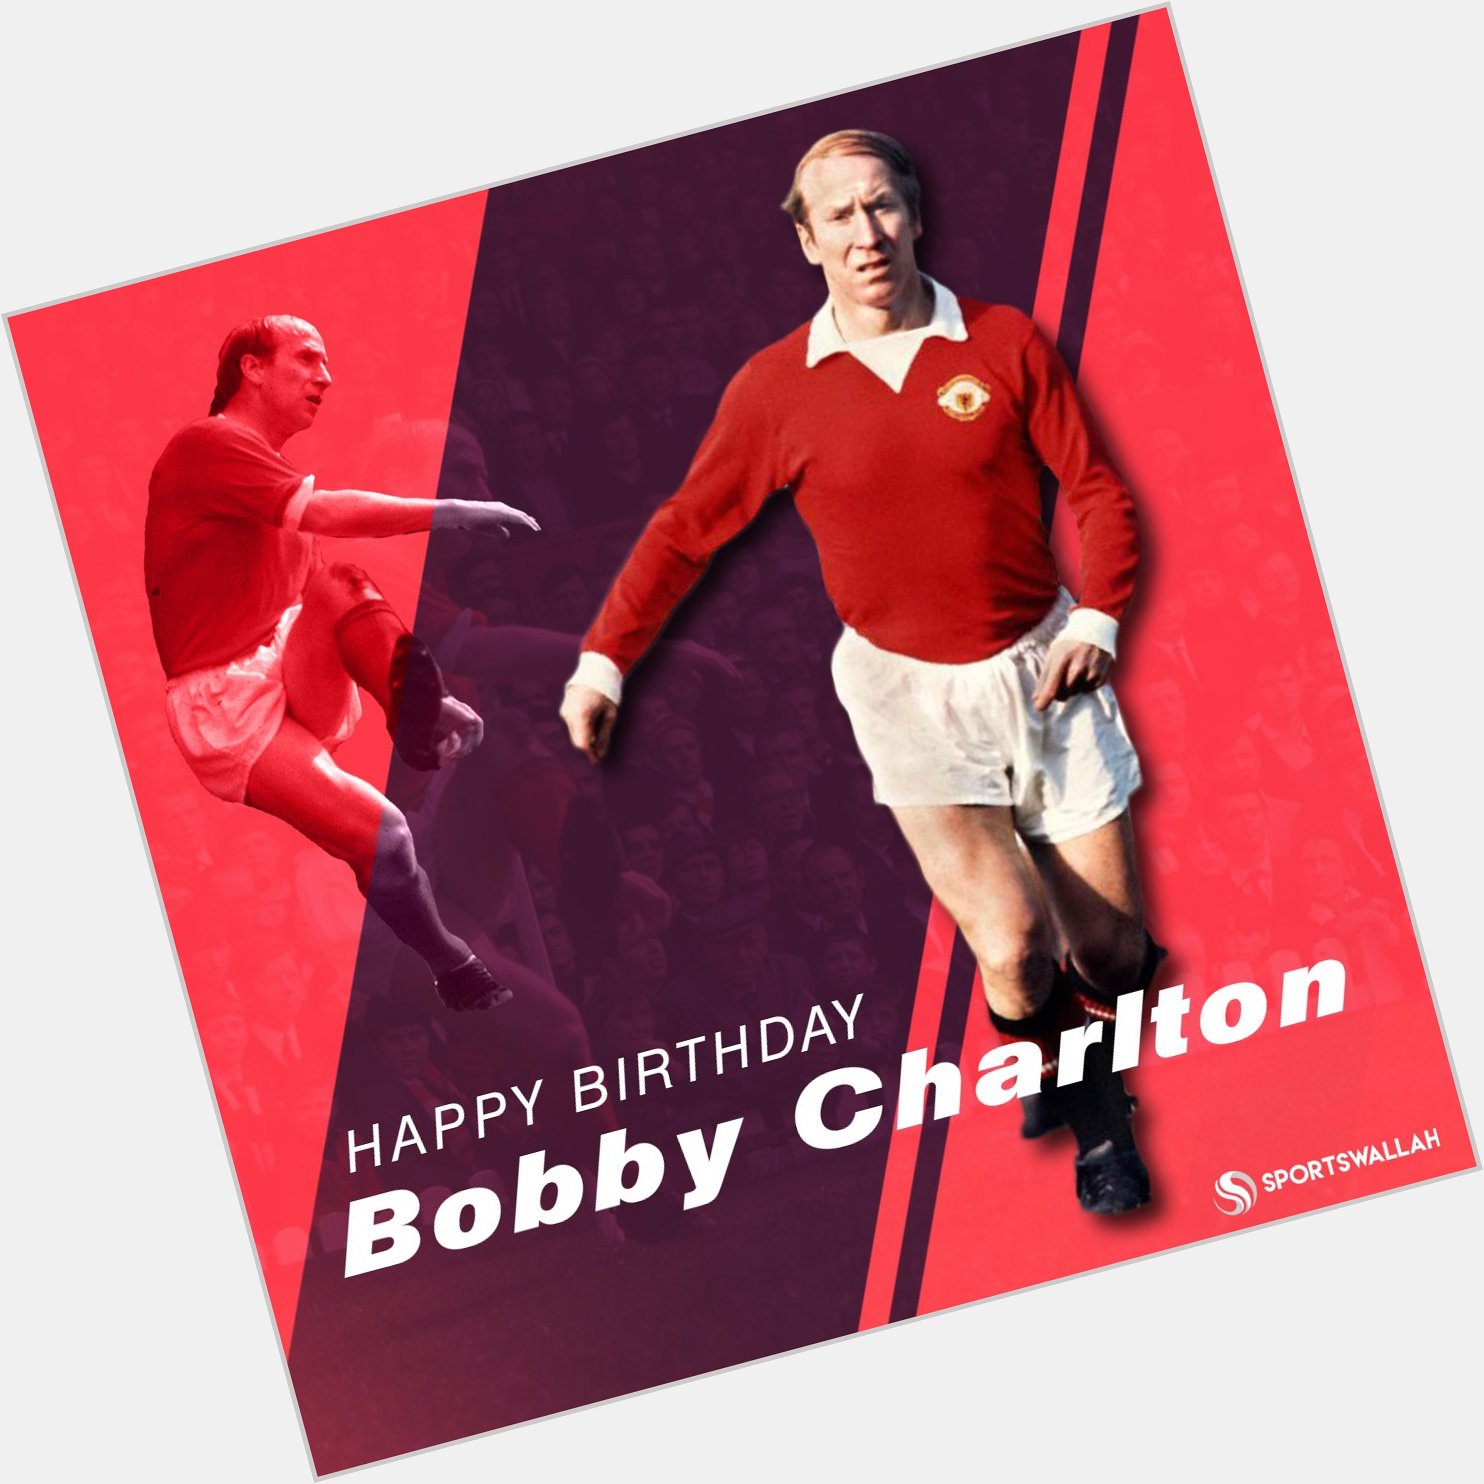 12 trophies 249 goals  758 games Happy birthday to one of greatest legends, Sir Bobby Charlton. 